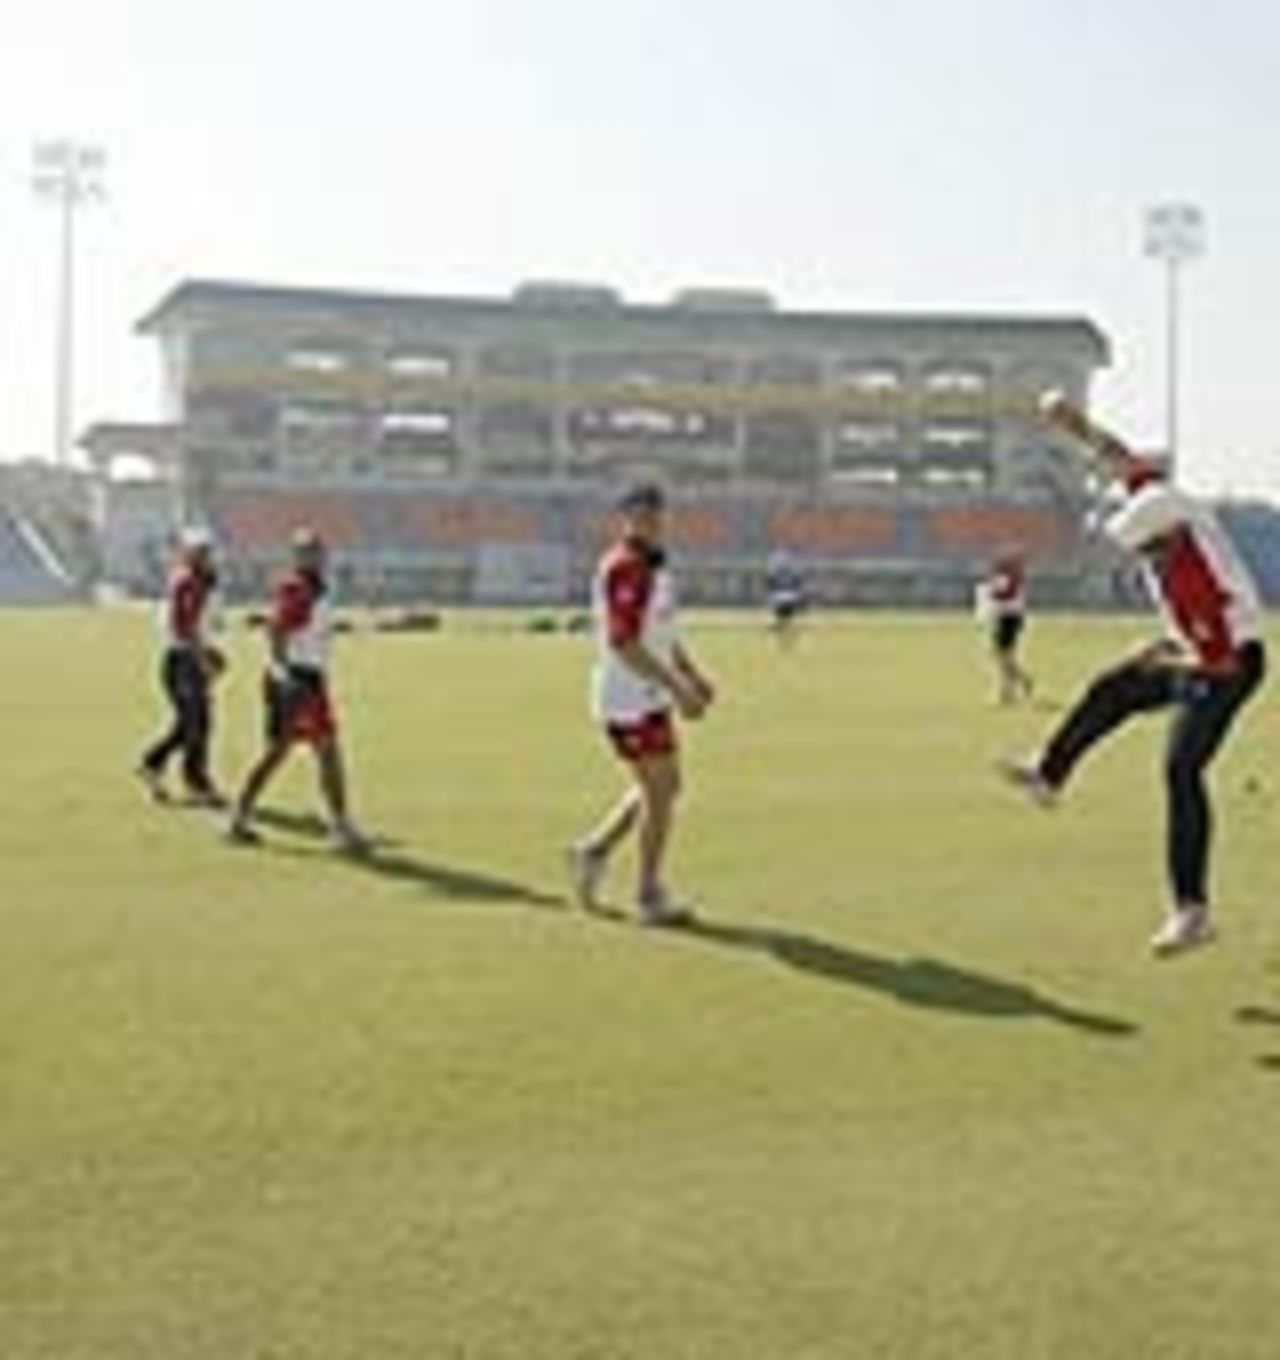 Cricketers practice at the PCA Stadium in Mohali